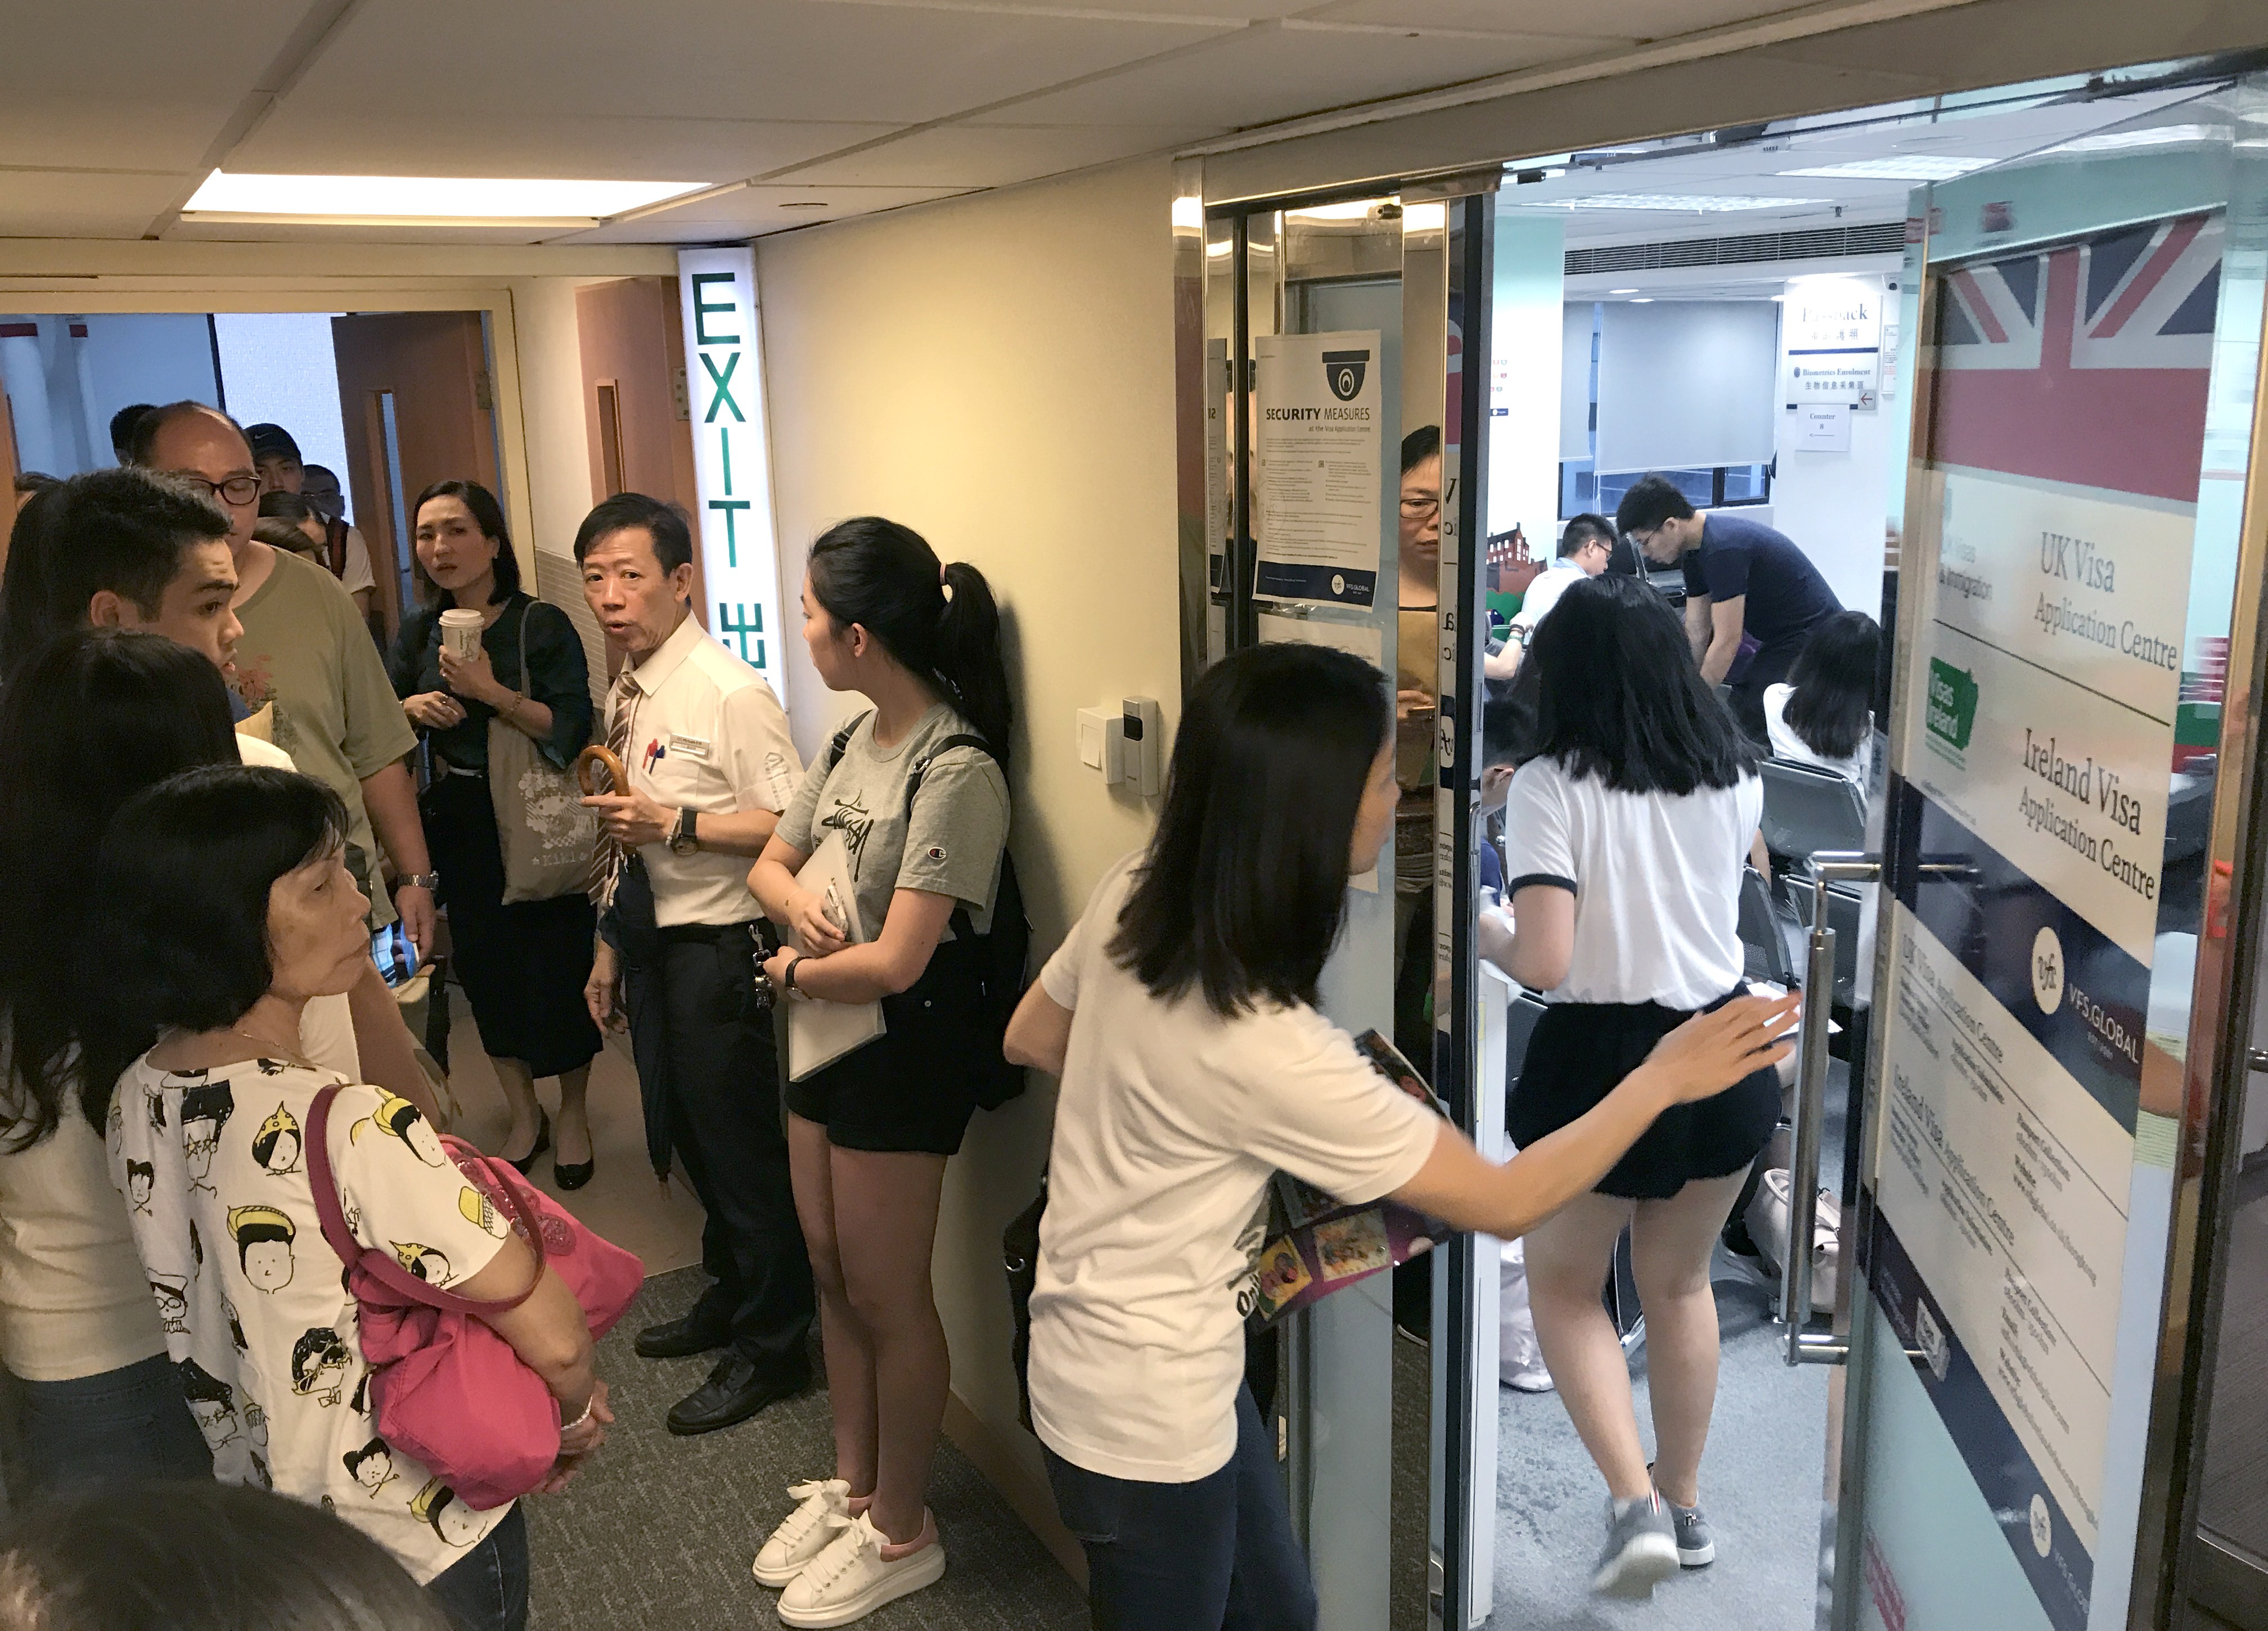 Anxious visa applicants and their families queued up at the British visa centre in Causeway Bay on Monday. Photo: Nora Tam